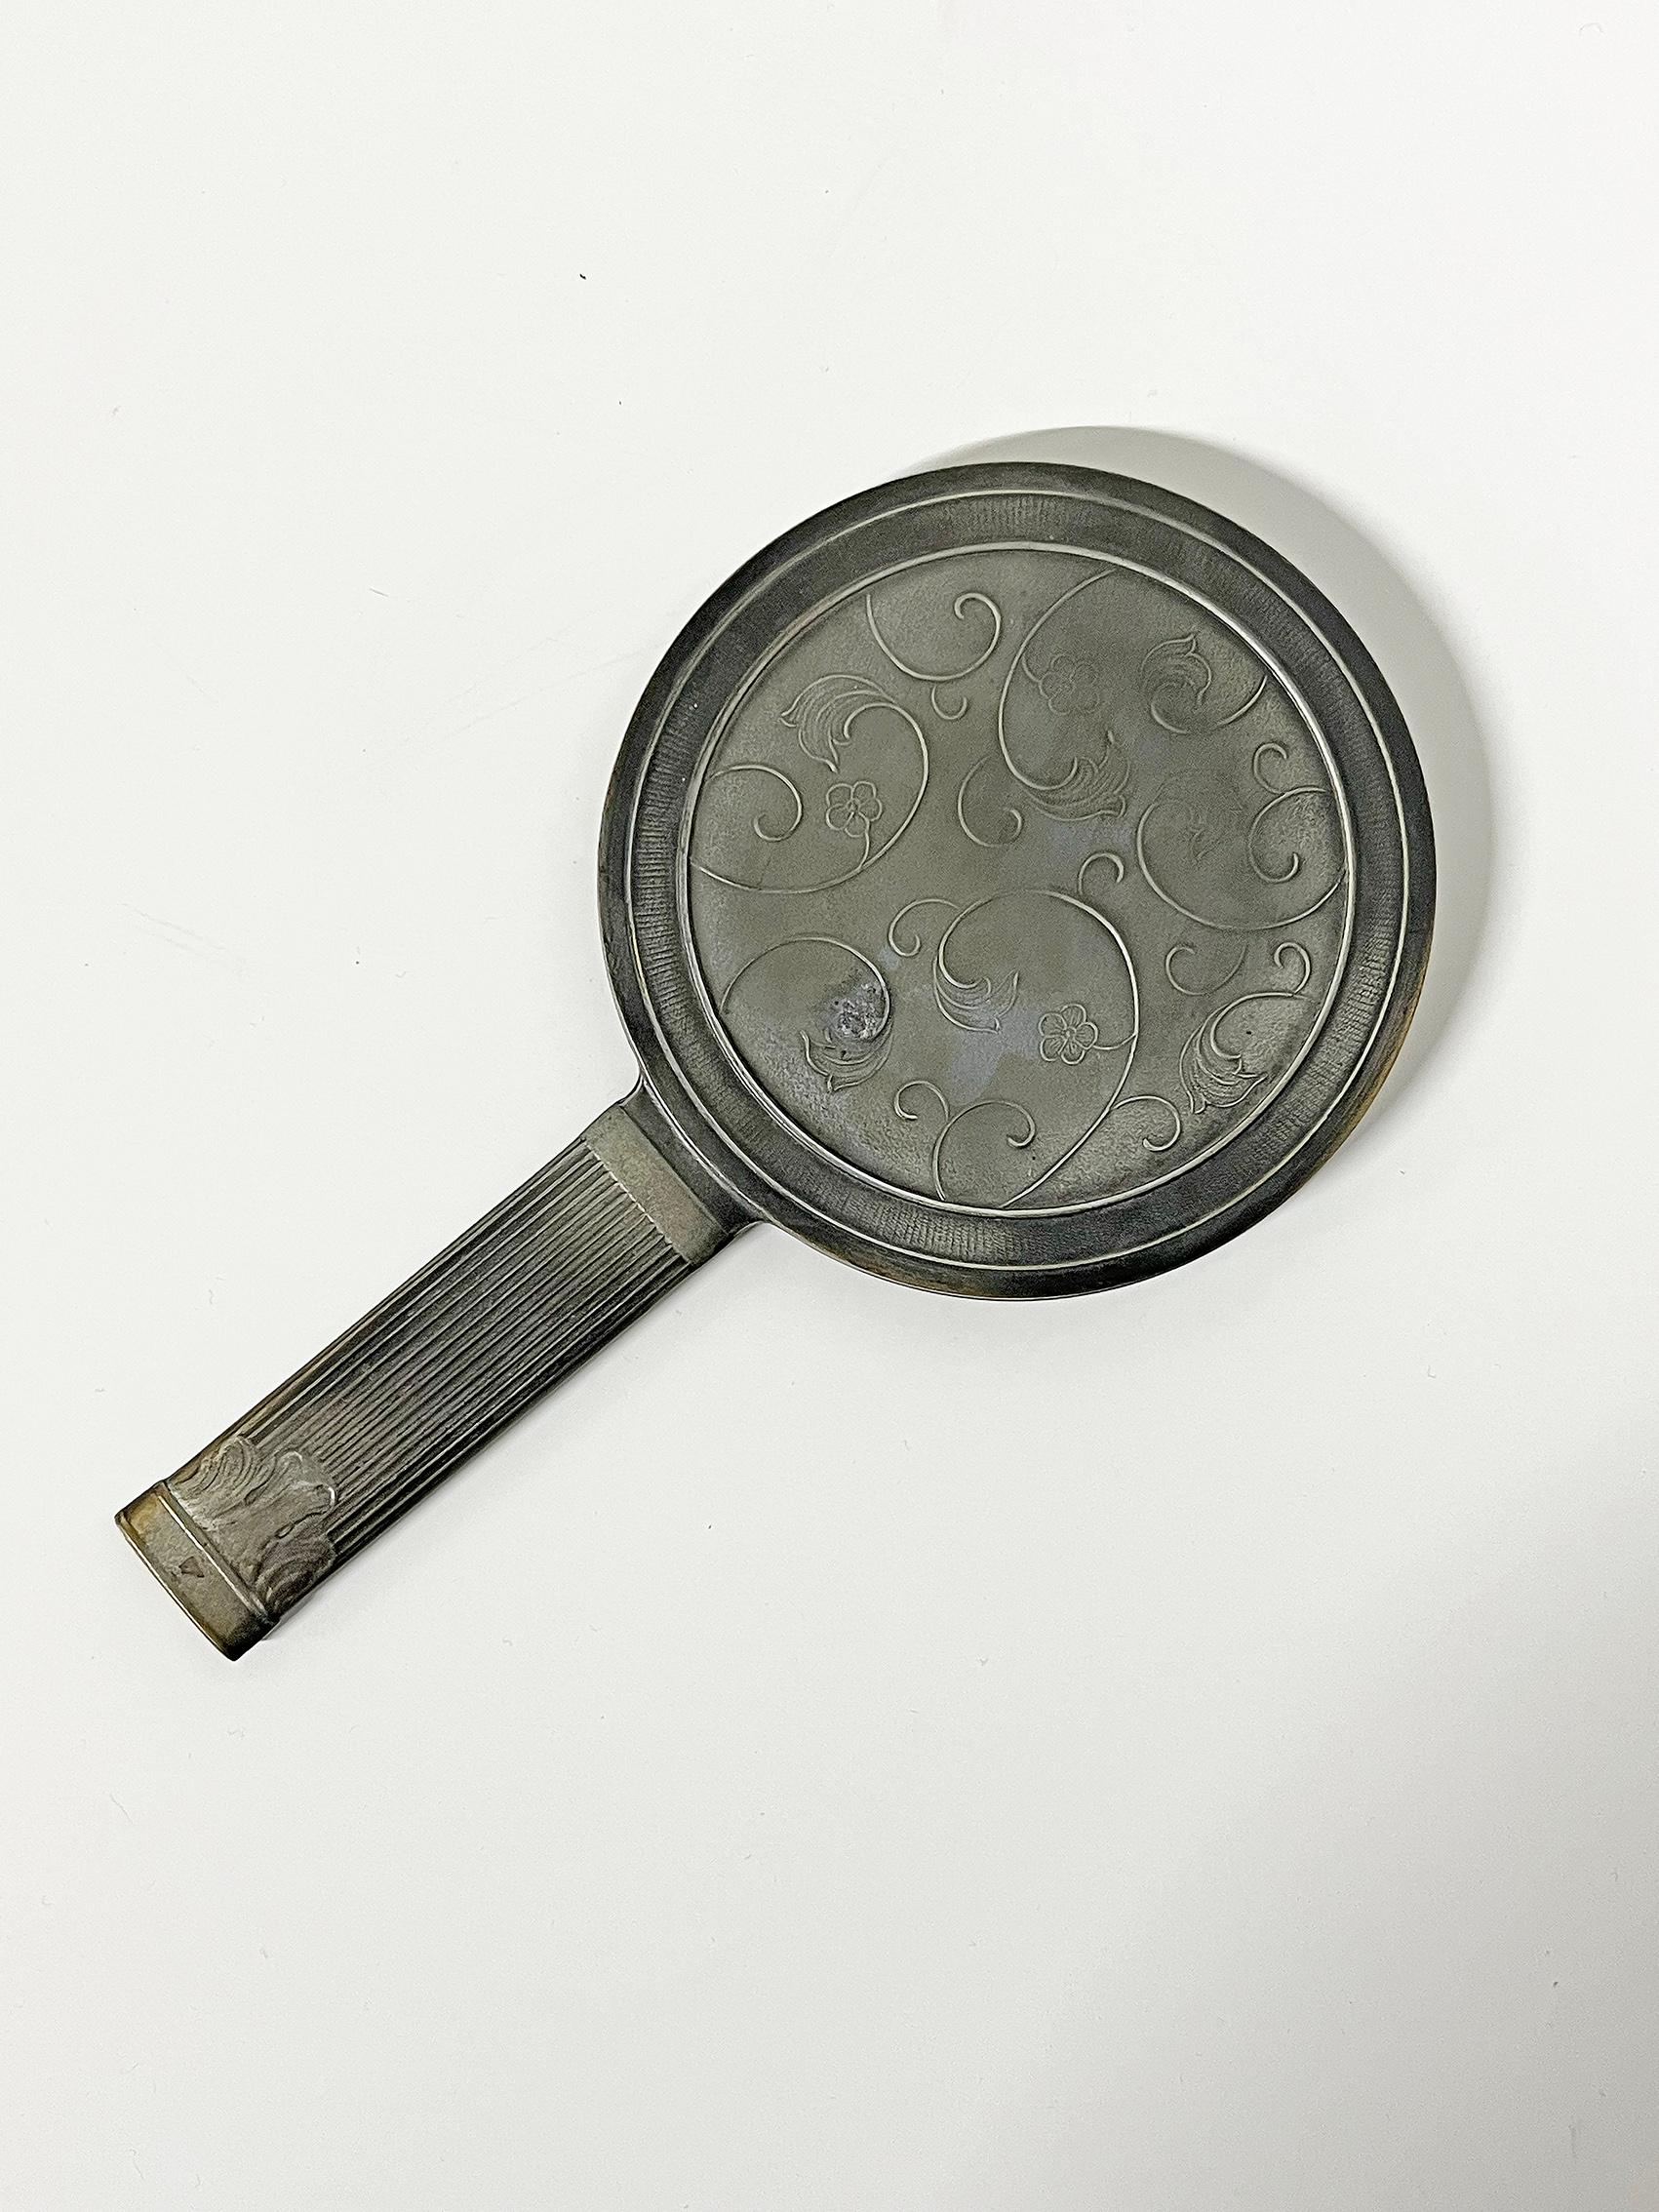 Beautiful, scandinavian modern pewter mirror, Sweden ca 1940's.  Unknown designer and maker. 
Signed on the handle: Made in Sweden. 
Wear and patina, consistent with age and use. Marks, scratches and blemishes. Metal and brass patina.